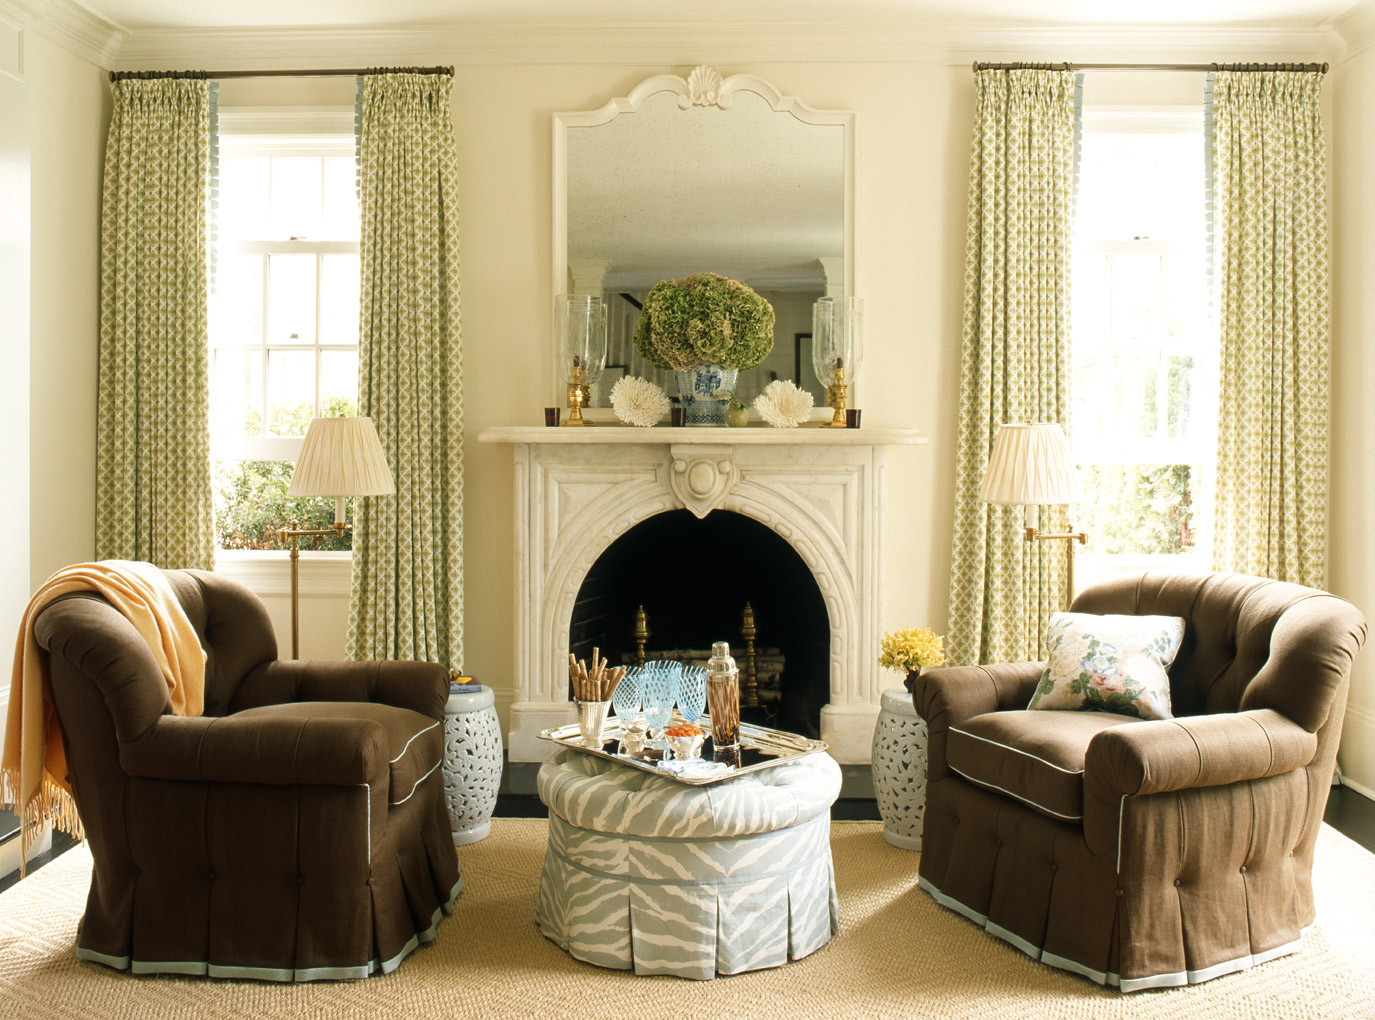 Living Room Decorating Styles
 How to Decorate Series Finding Your Decorating Style